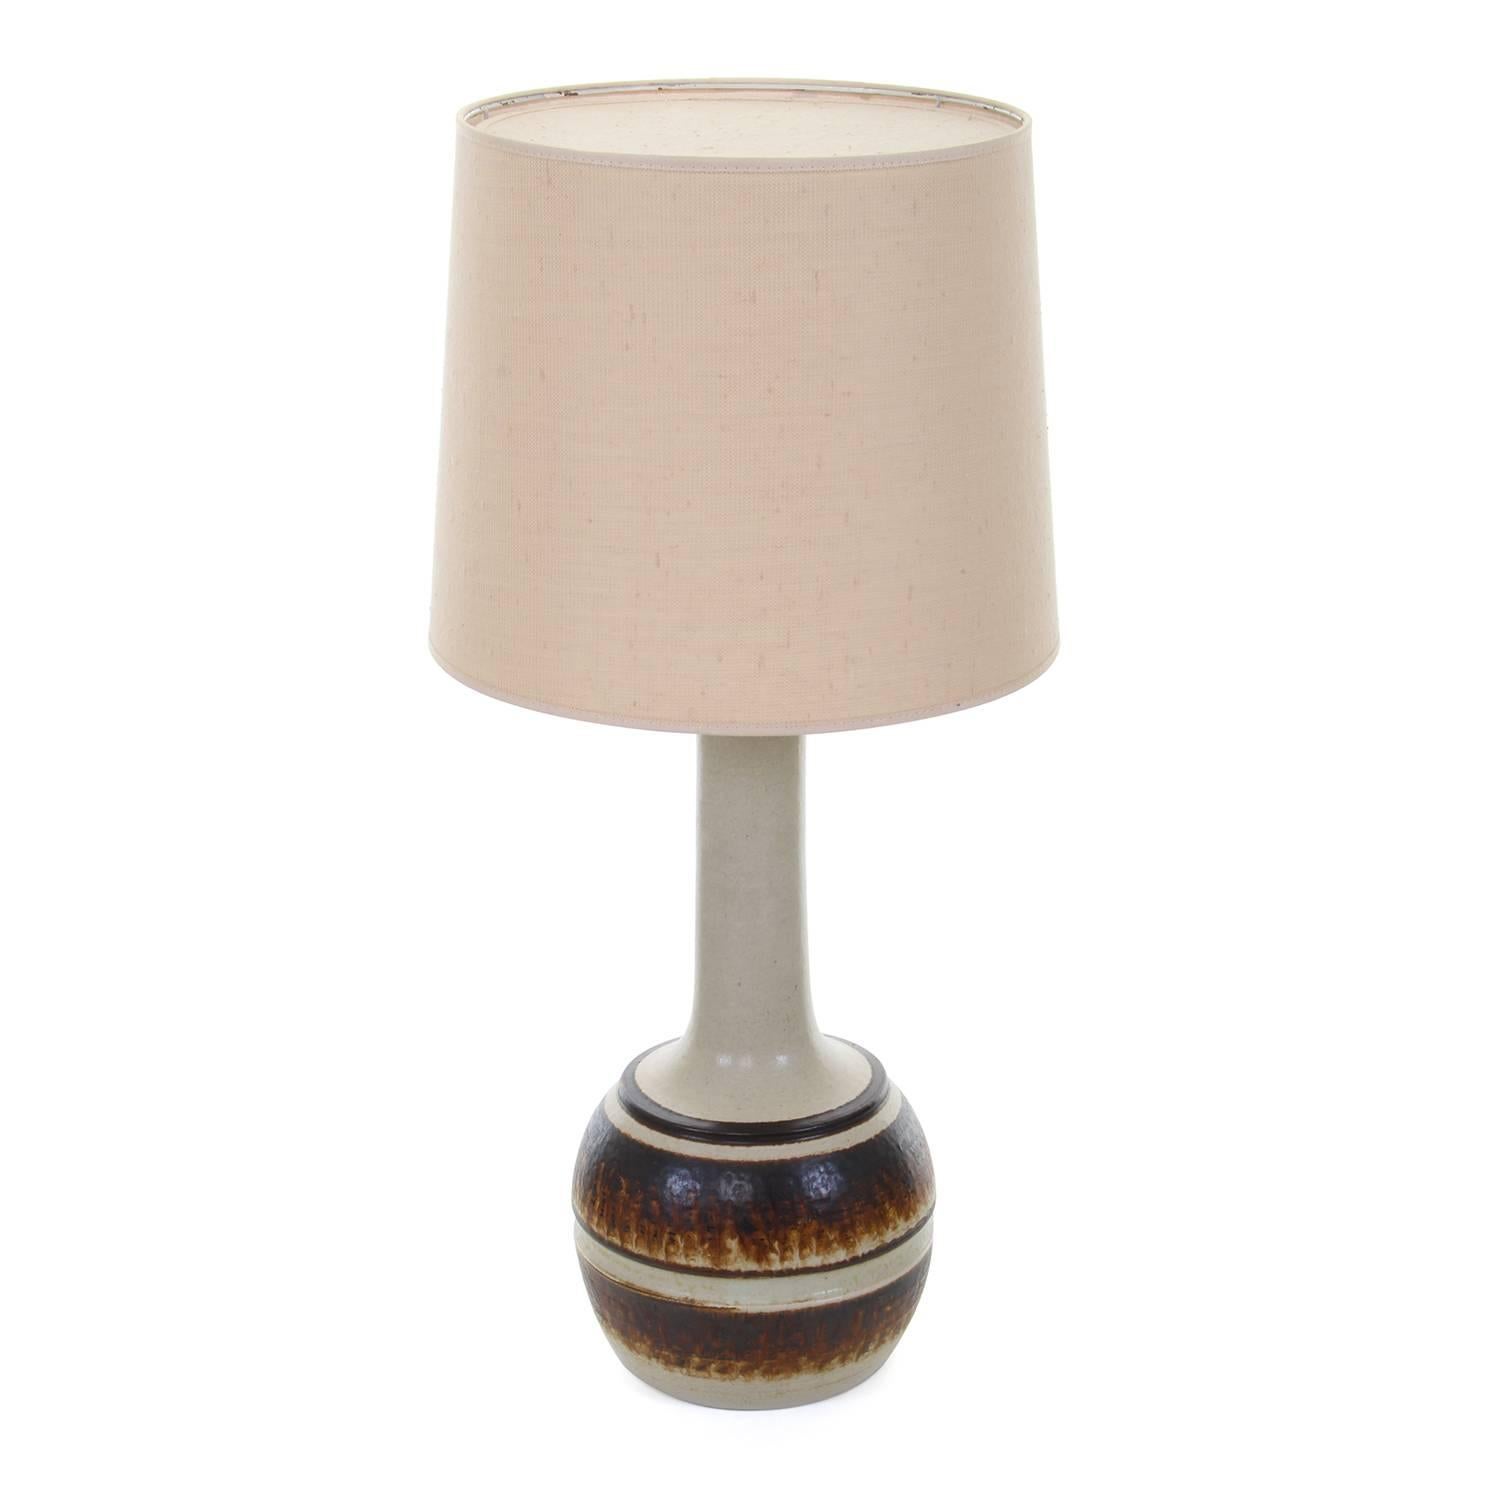 Large Stoneware Table Lamp by Axella Design, 1970s, Danish Modern Table Light In Excellent Condition For Sale In Frederiksberg, DK